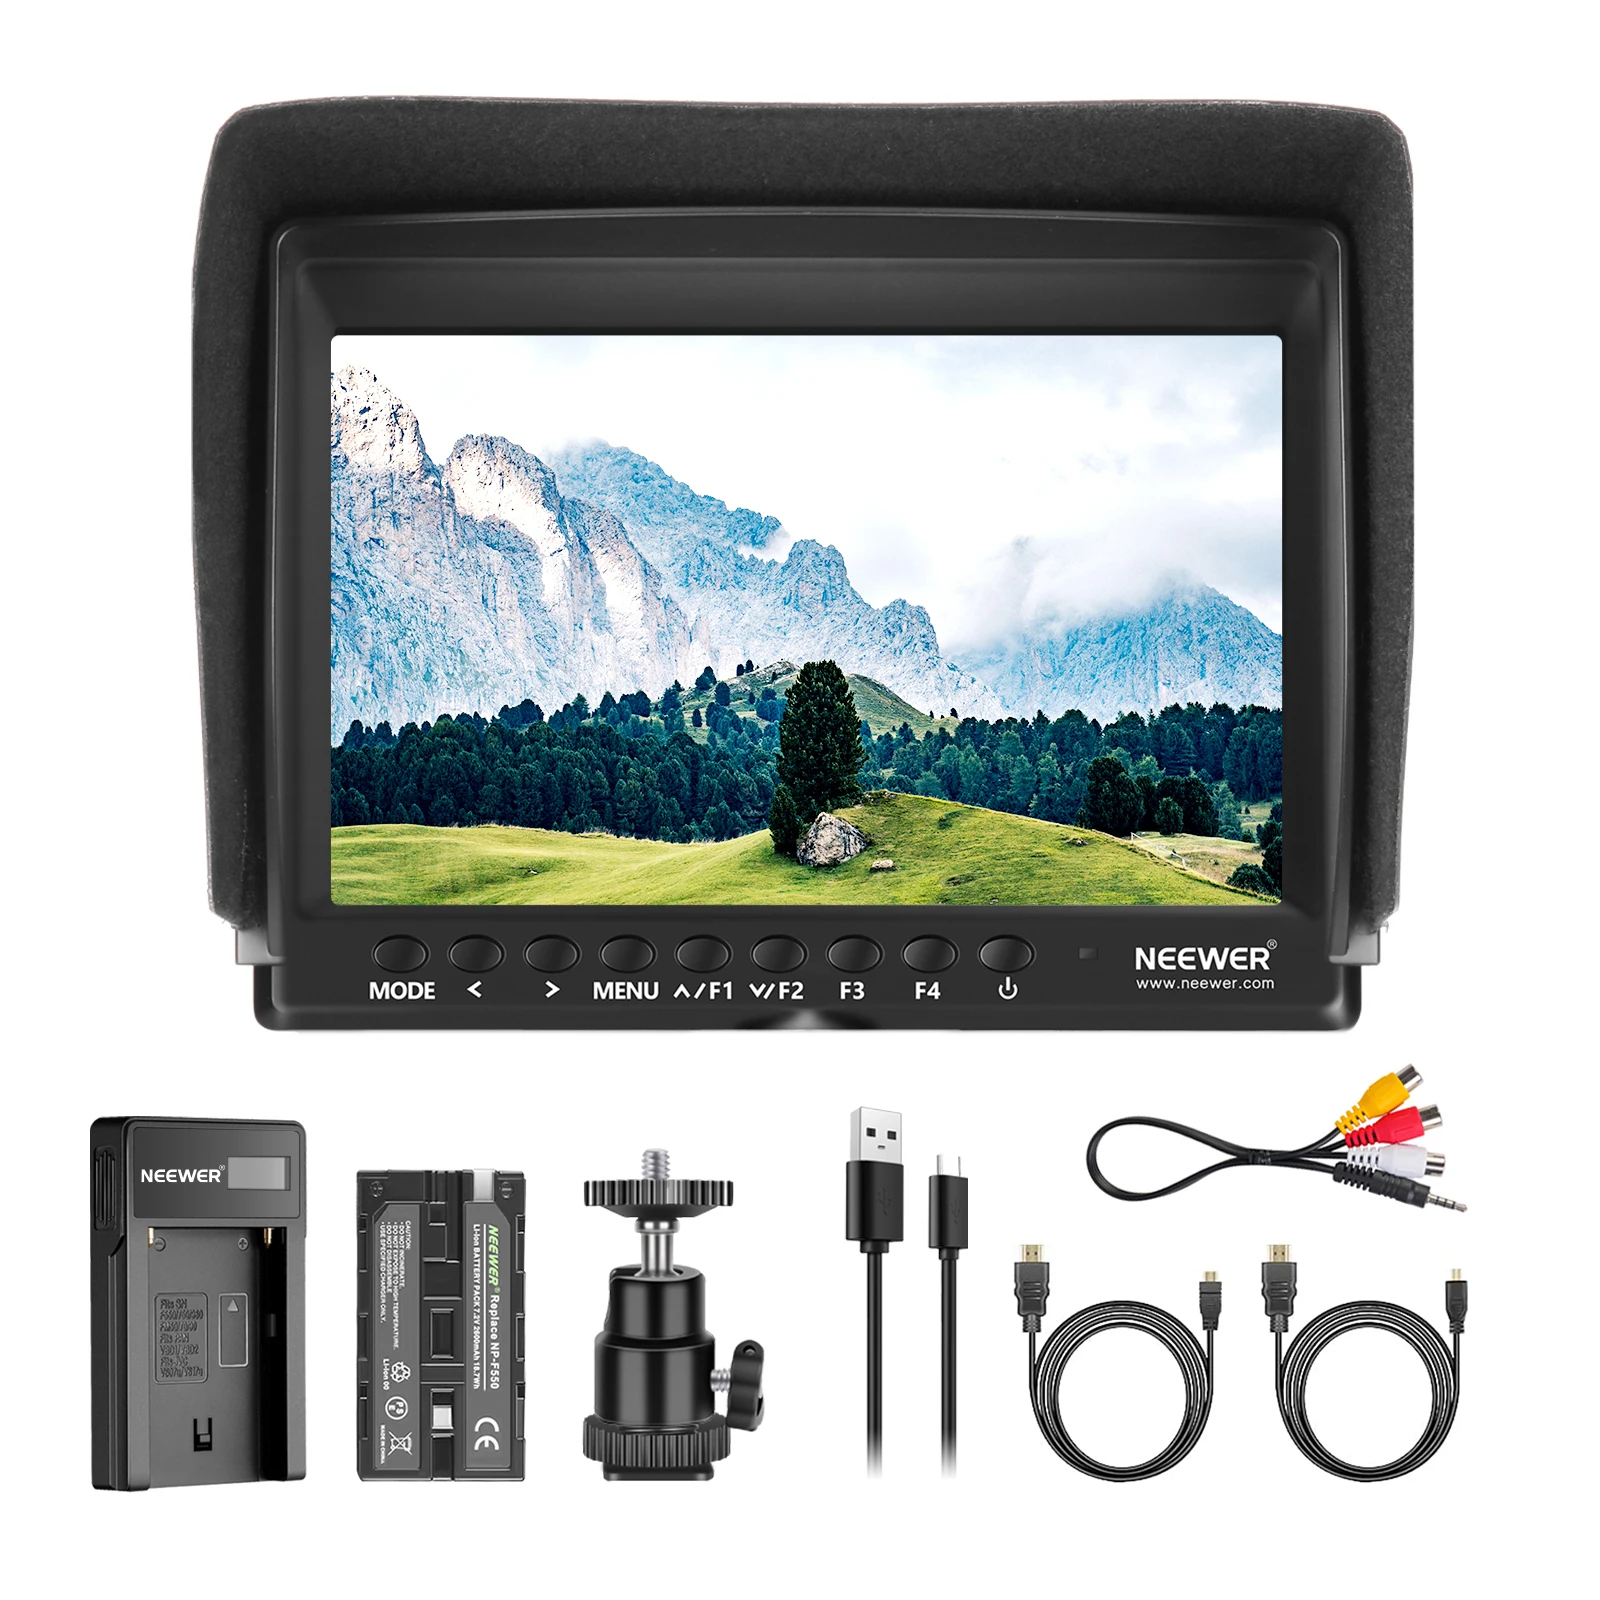 

Neewer 7 Inch Camera Field Monitor HD Video Assist 4K HDMI Input 1080p With Li-ion Battery/USB Charger For Handheld Stabilizer